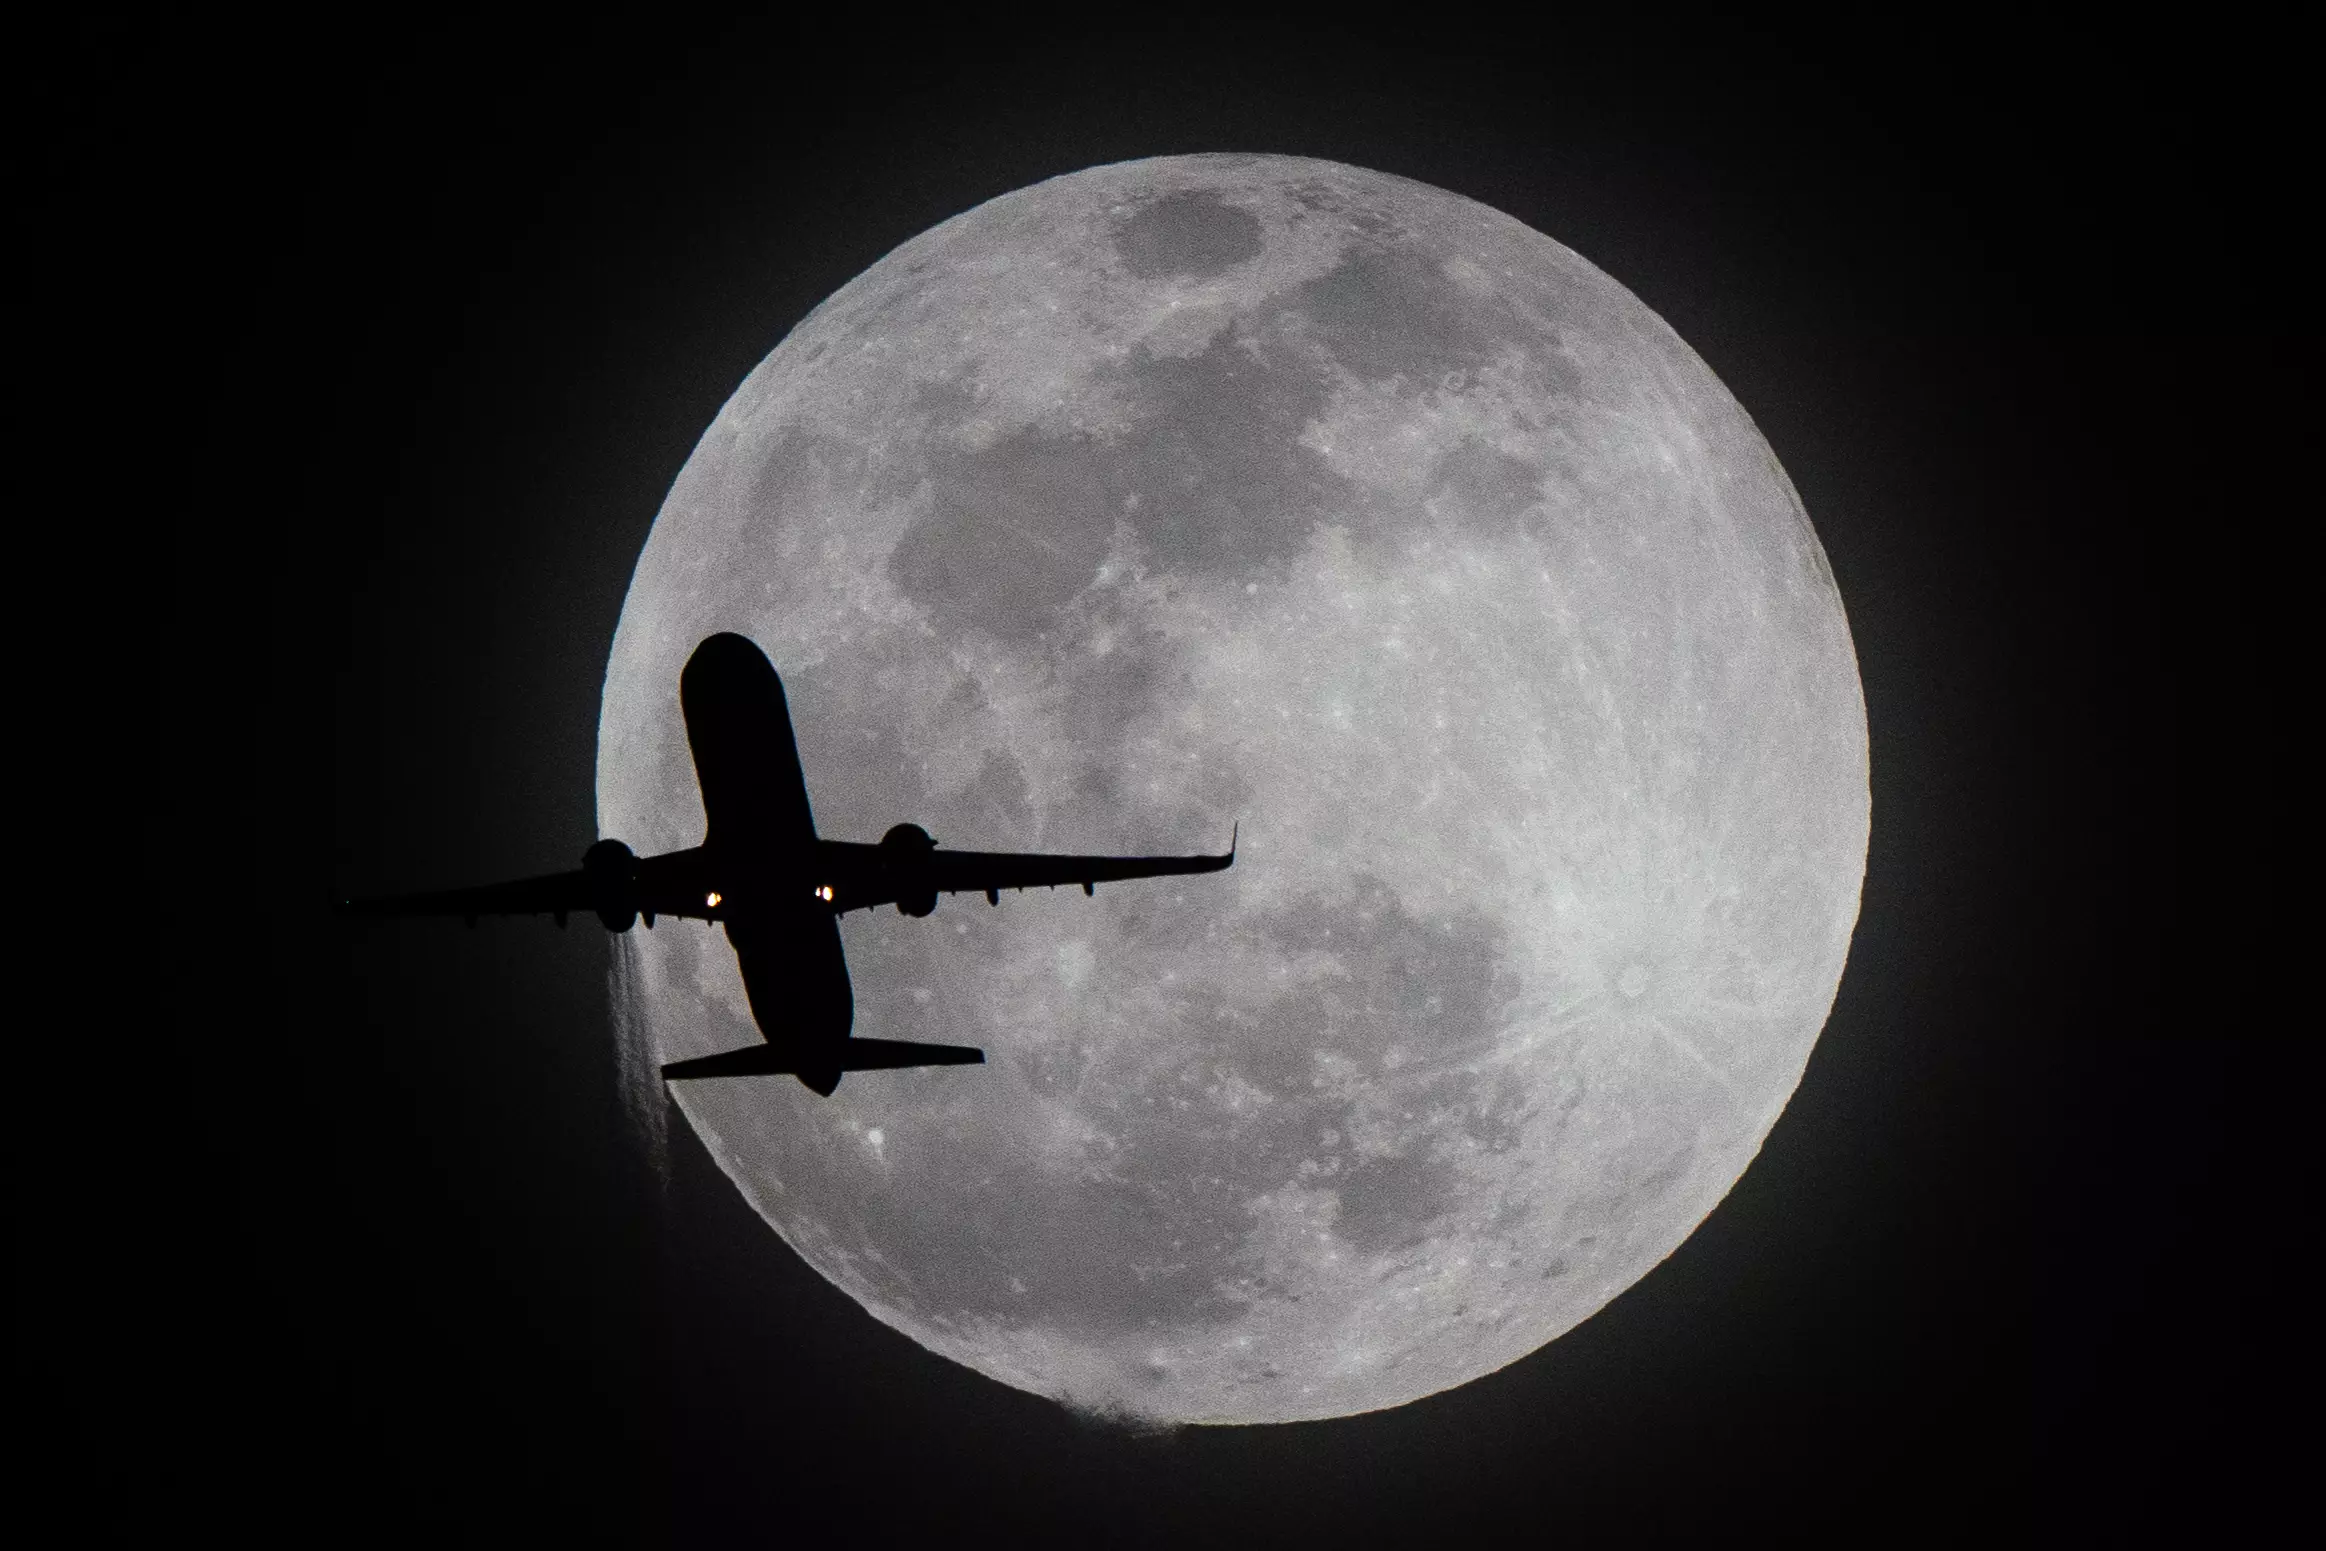 Moon = motionless. Plane = moving. Or is it?